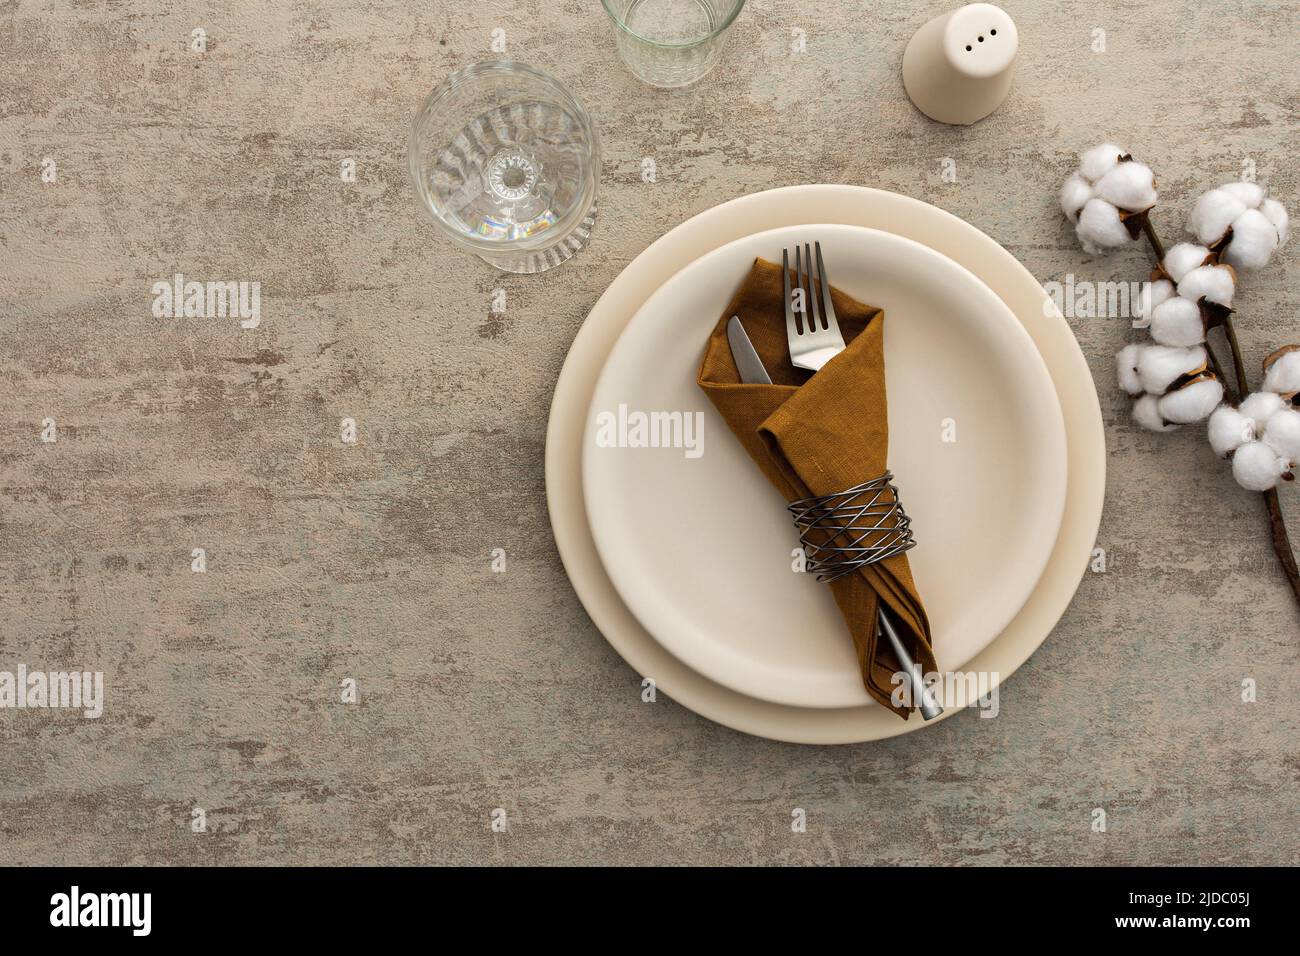 Table setting, plate with napkin and cutlery on a brown background, top view of the served table decorated with dry flowers Stock Photo